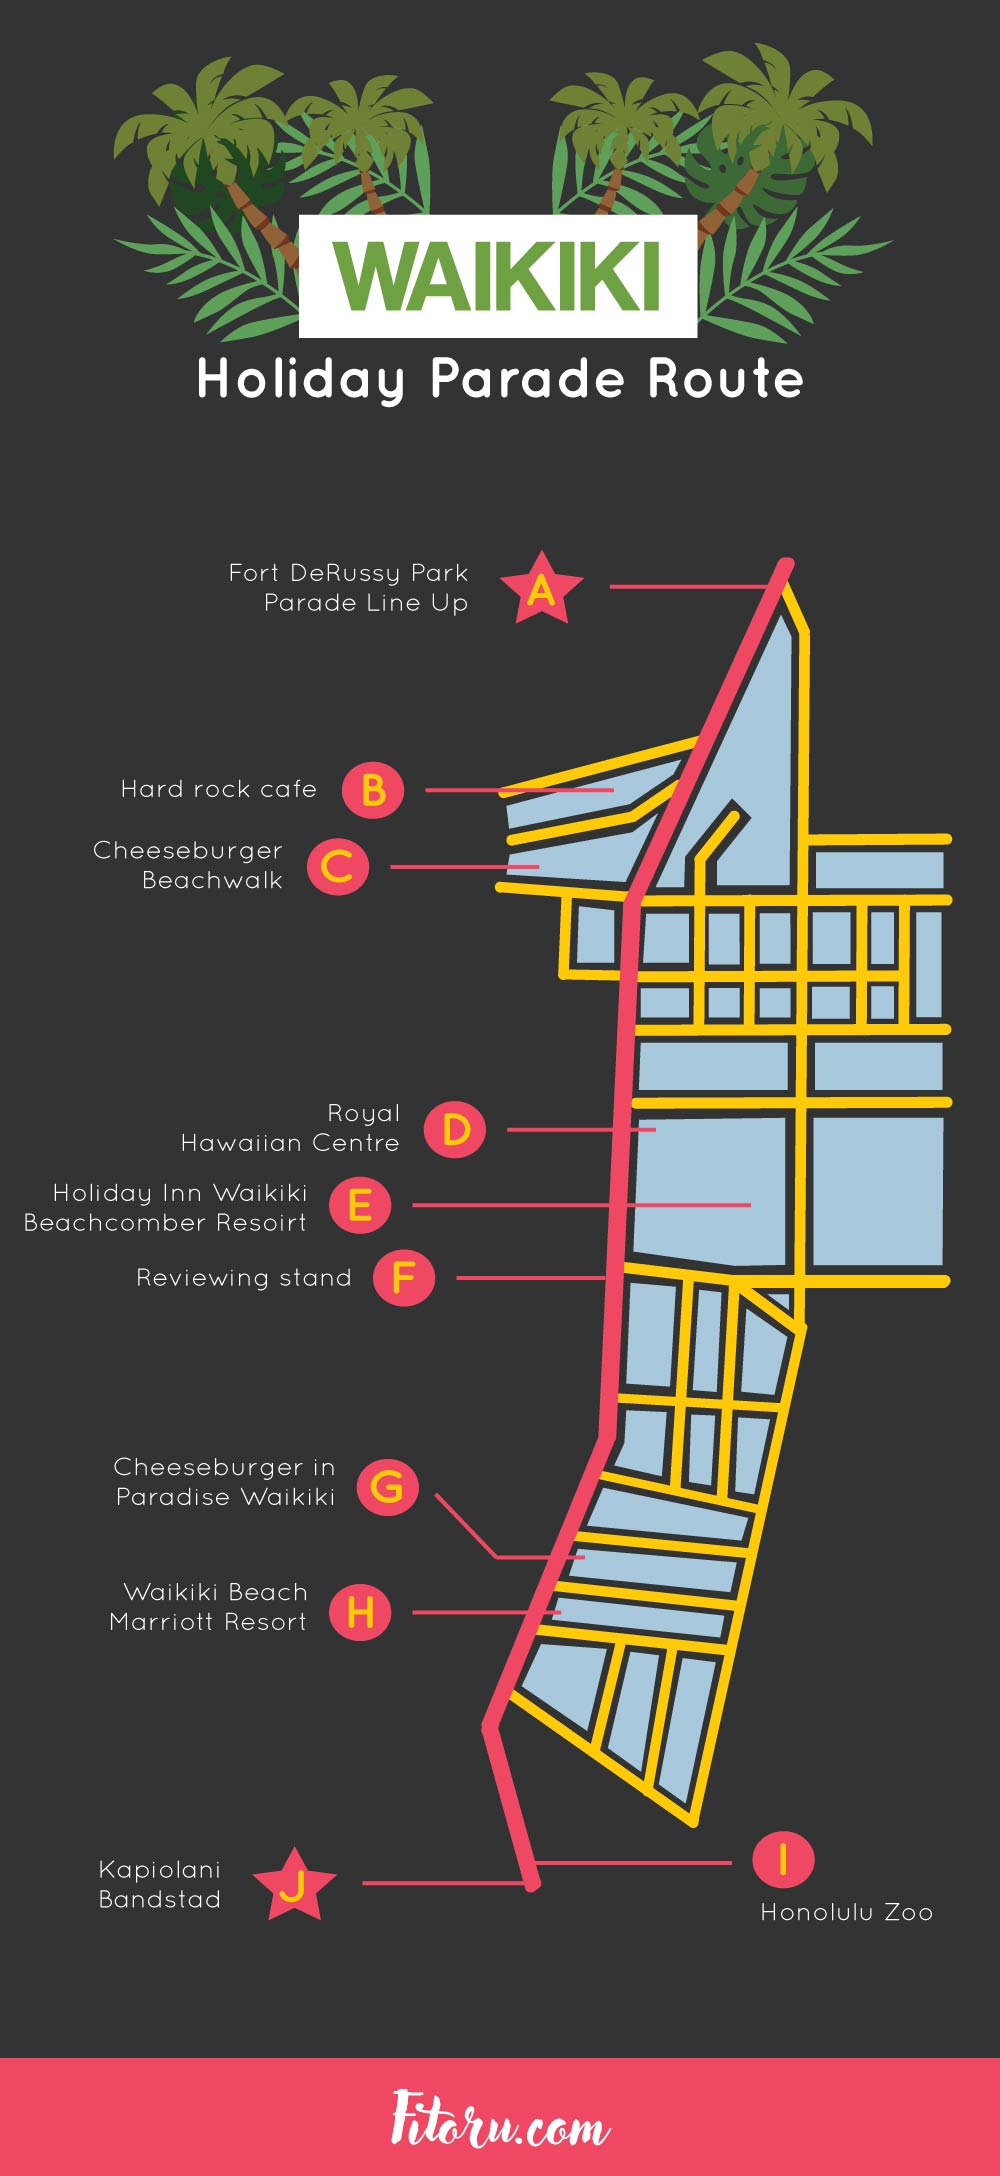 Here is a map of the Waikiki Holiday parade route.